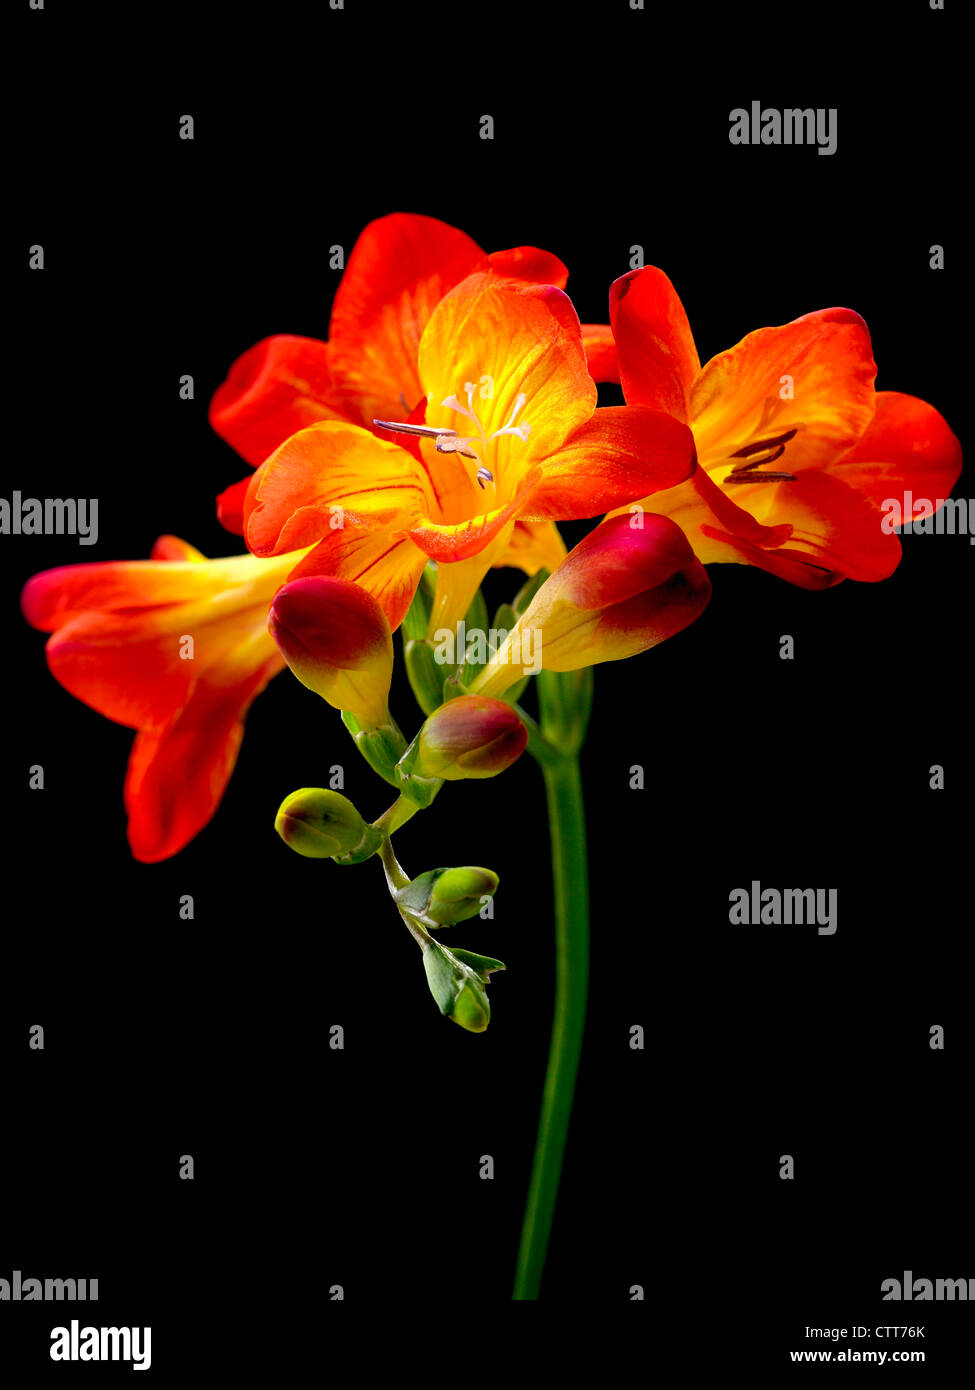 Freesia, Orange coloured flowers cluster on a single stem against a black background. Stock Photo